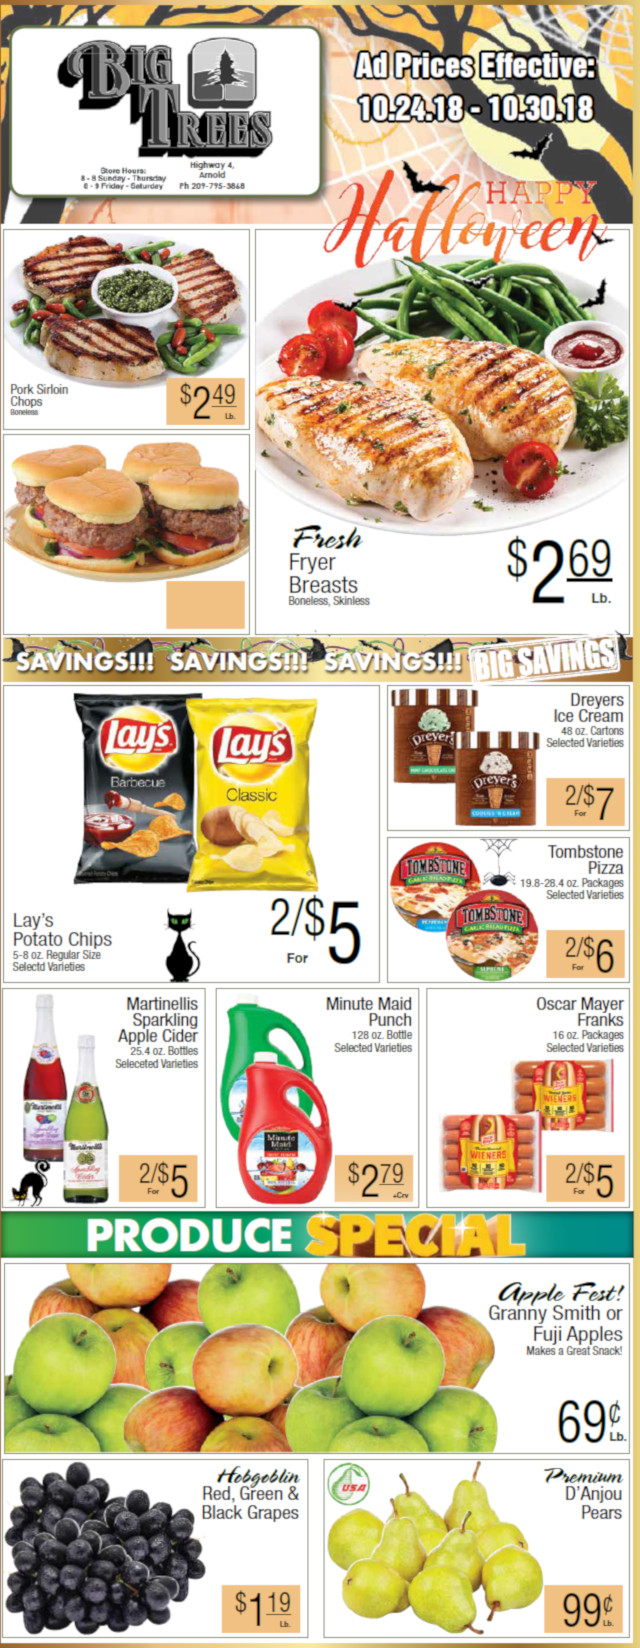 Big Trees Market Weekly Ad & Grocery Specials Through October 30th